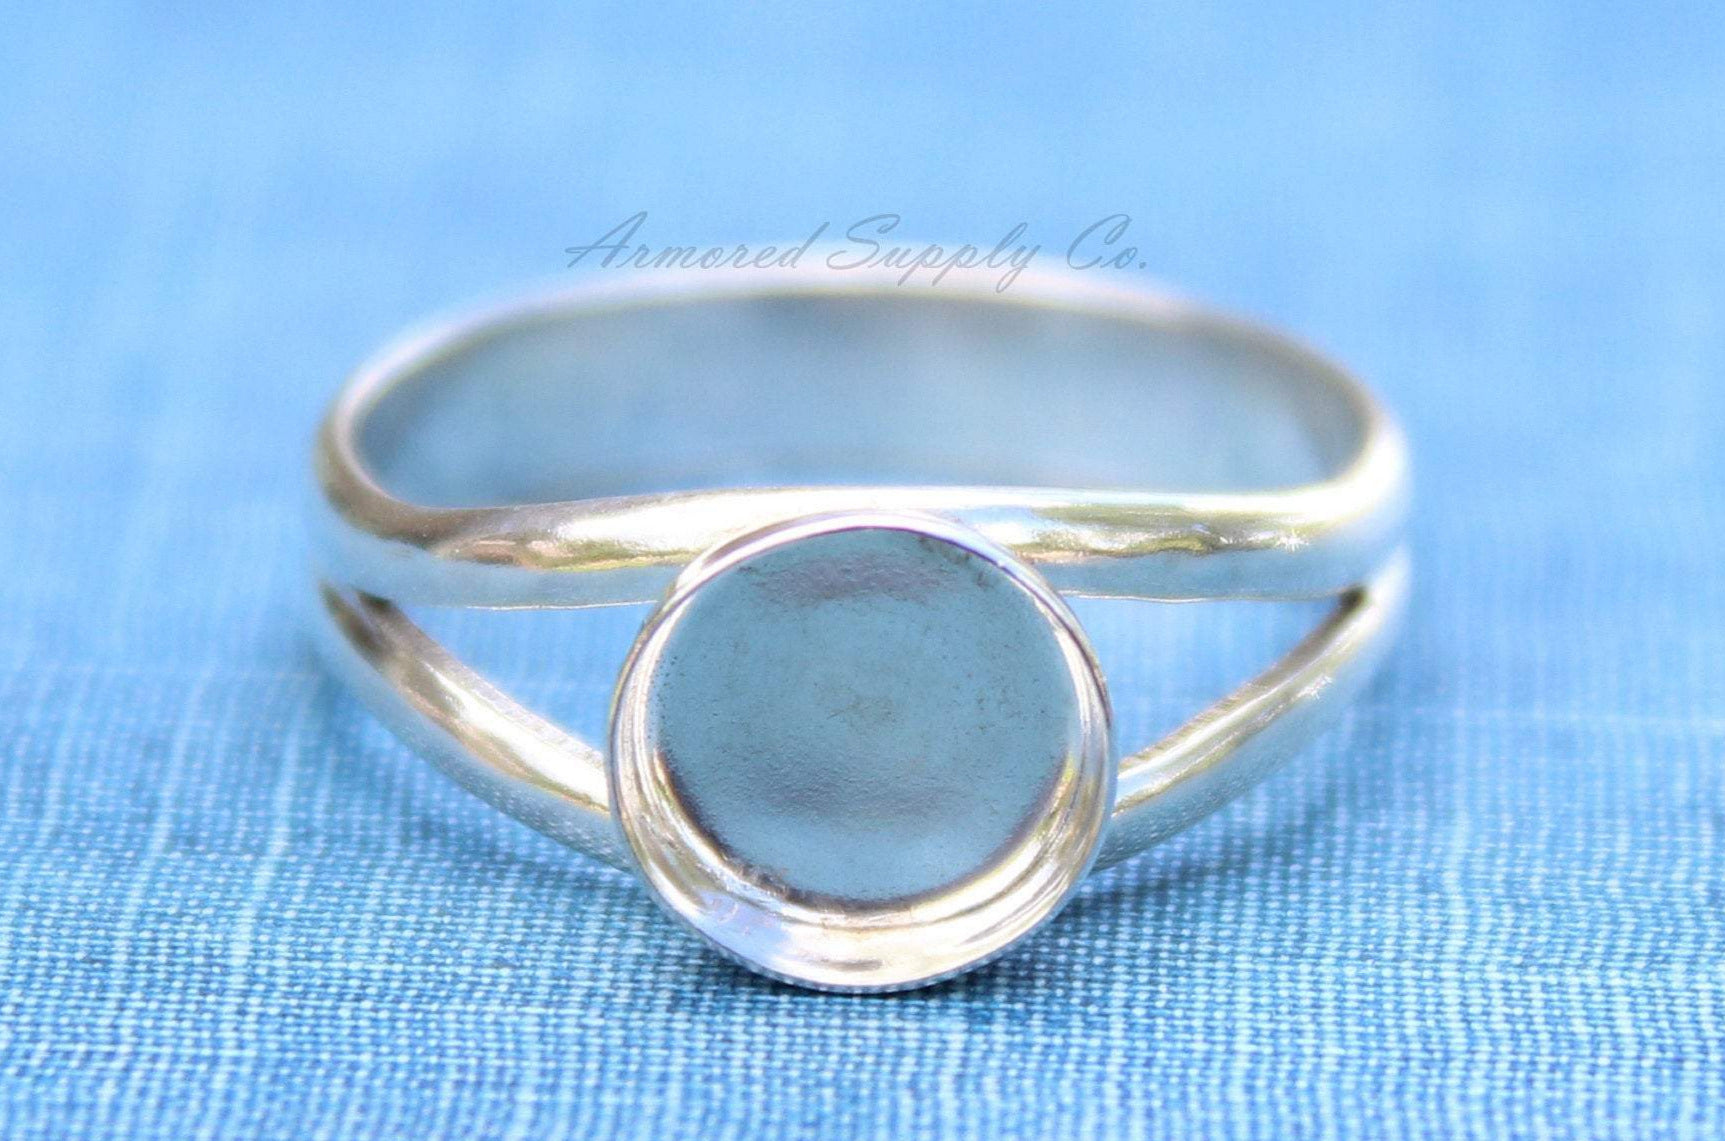 Sterling Silver Double Split Ring Band Bezel Cup Ring blank, Round Cabochon, Breast Milk, DIY jewelry supplies, wholesale jewelry, diy ring